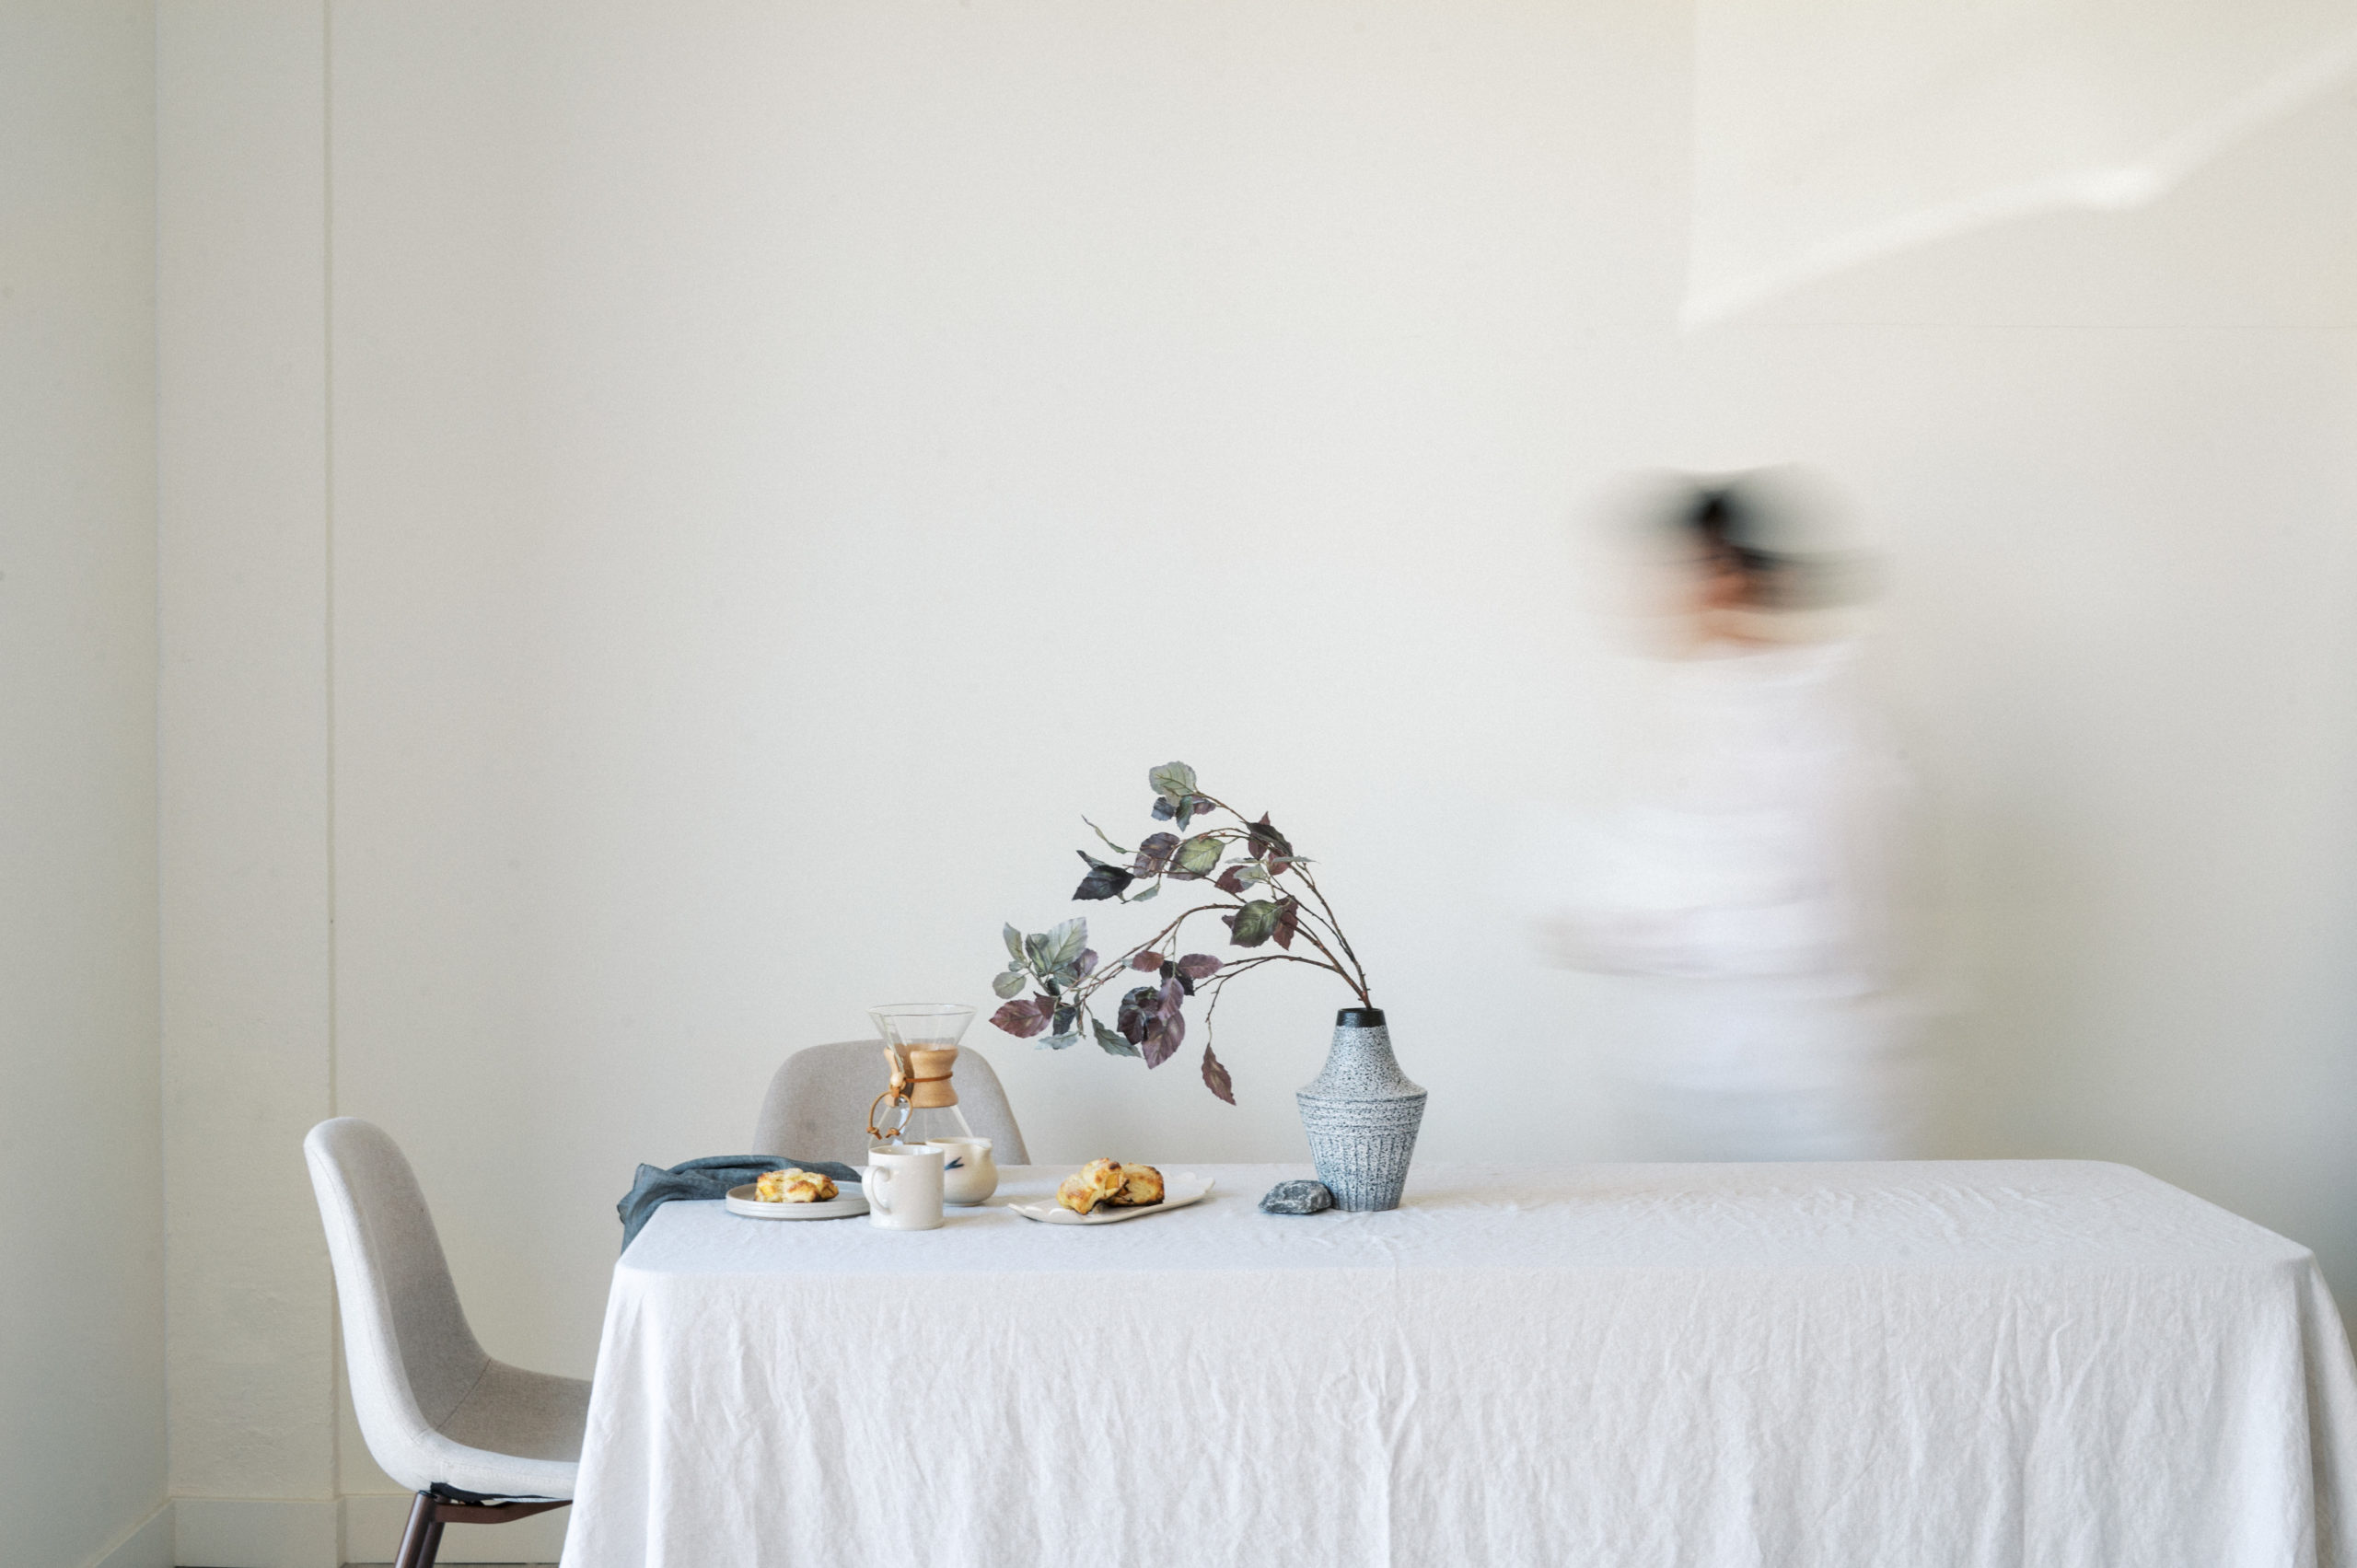 Blurry woman walking behind breakfast table against white wall